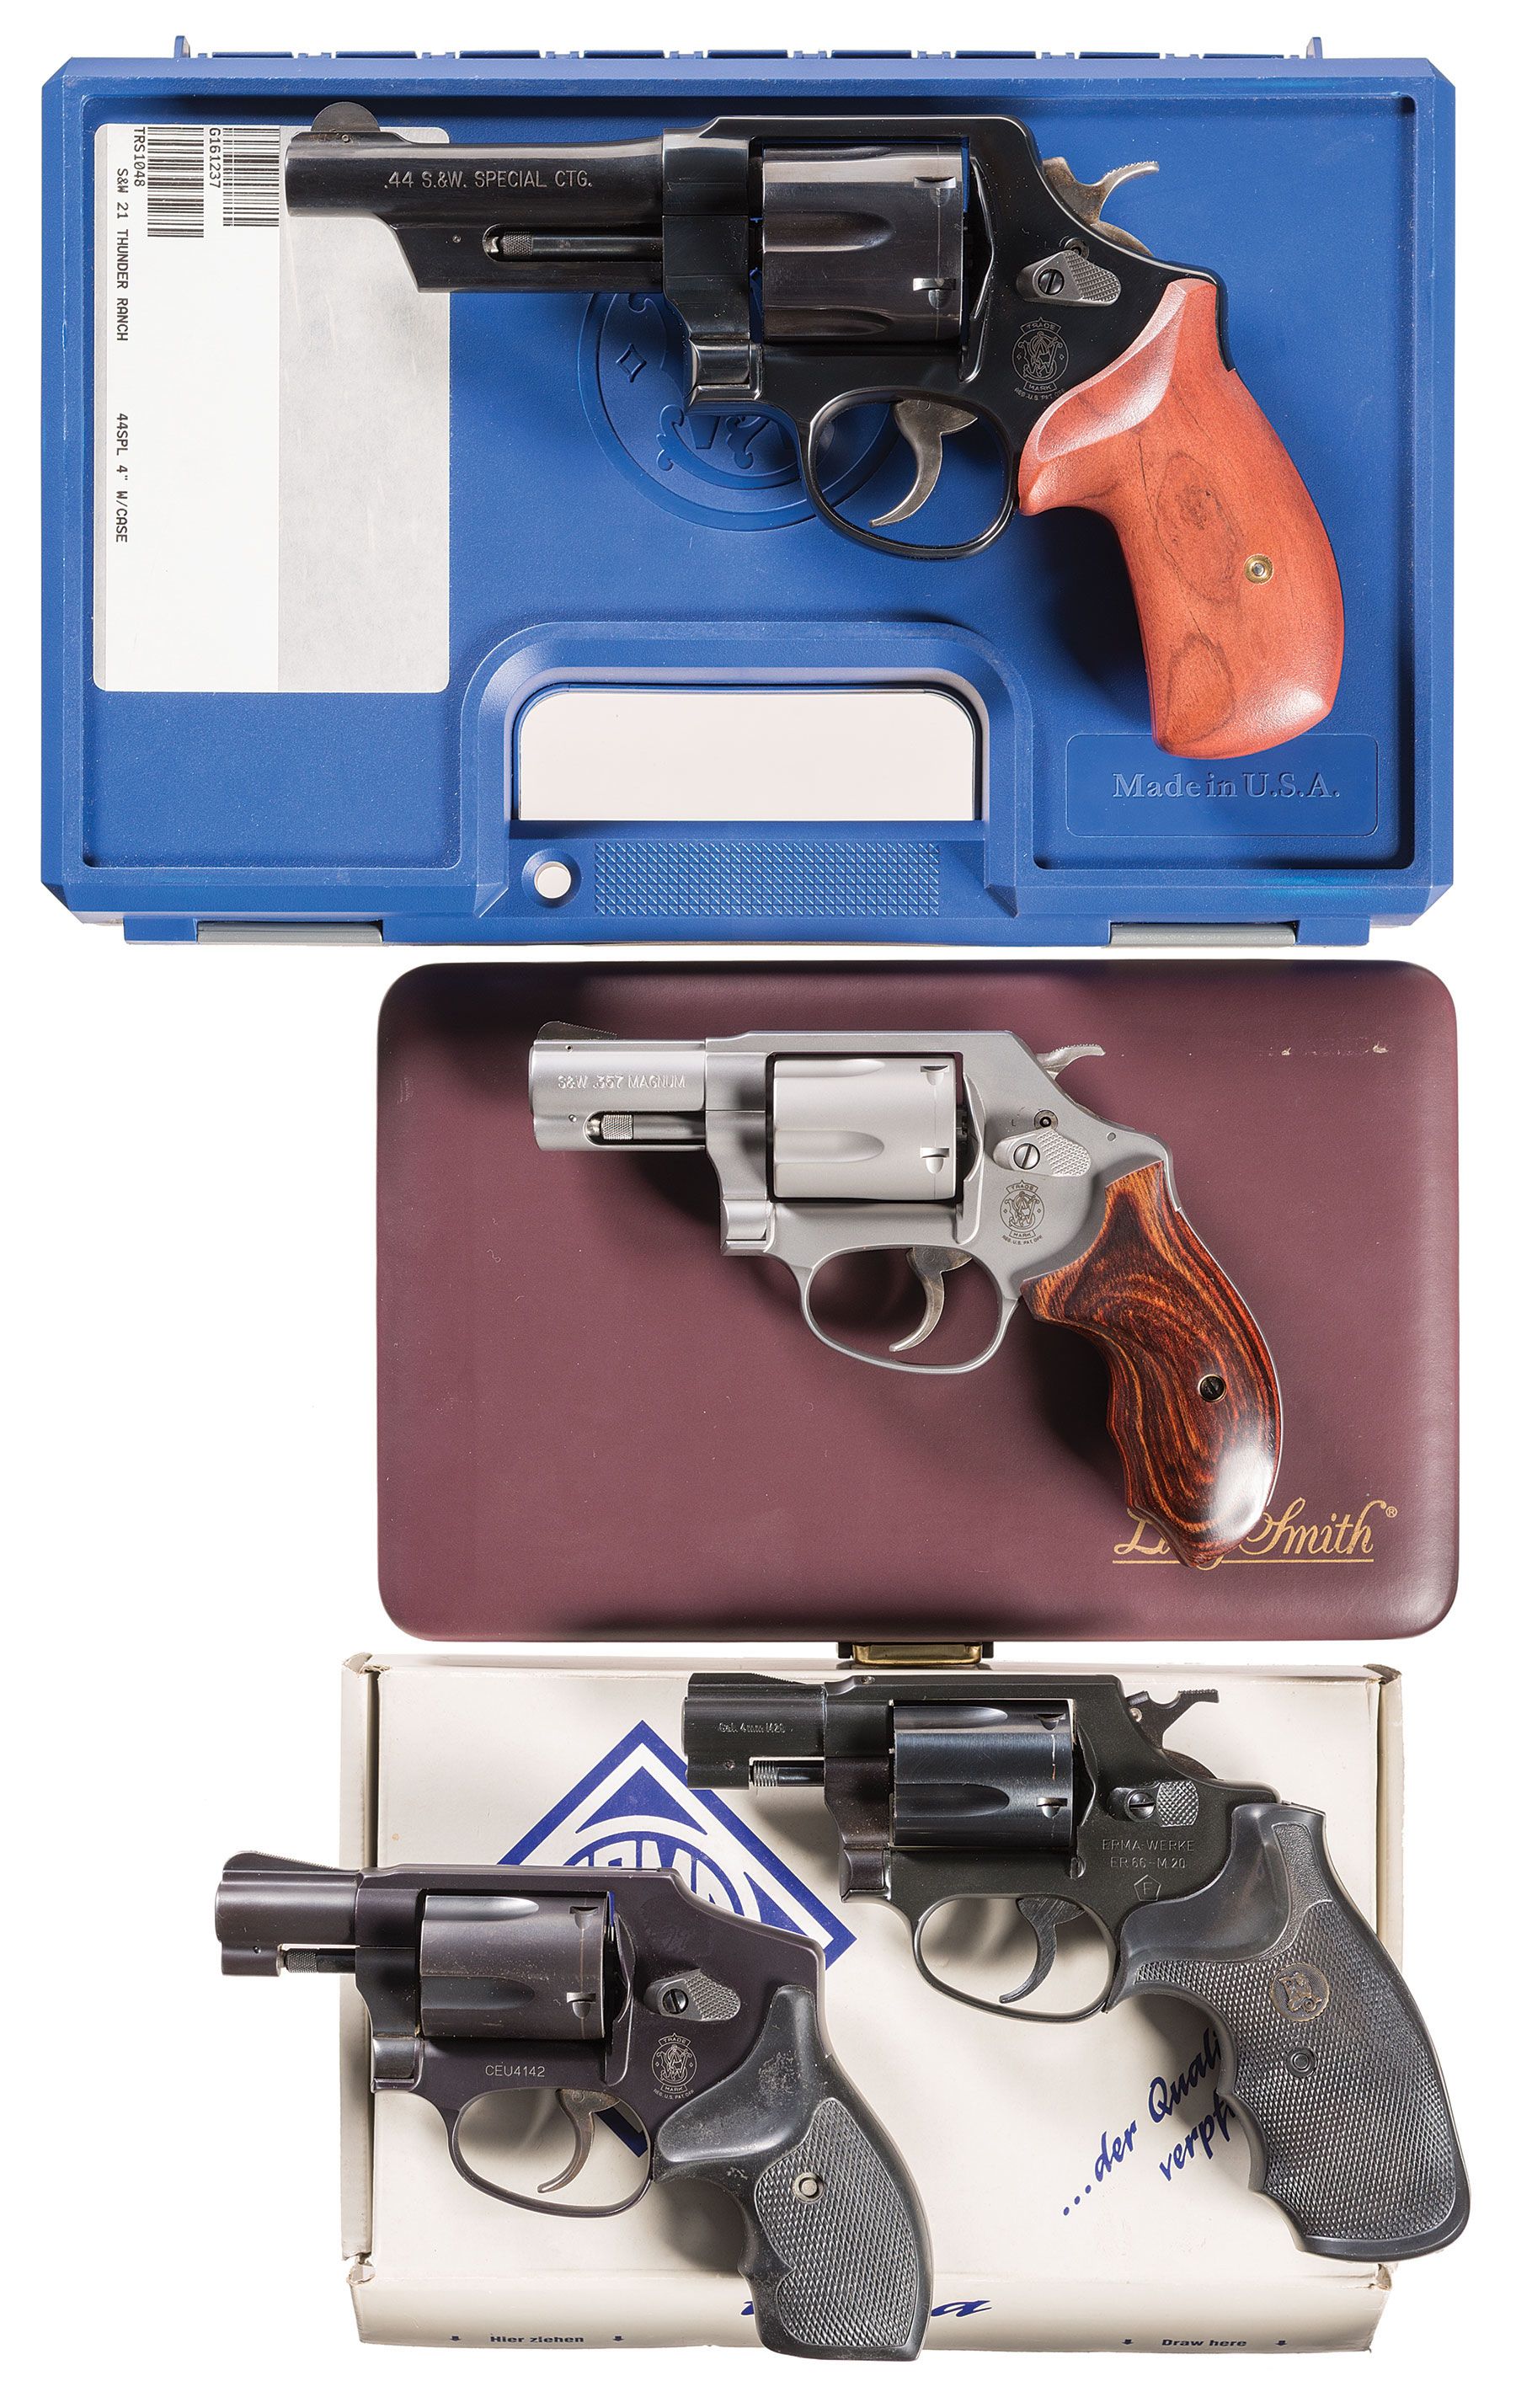 Four Double Action Revolvers A Smith Wesson Model 21 4 Thund Rock Island Auction